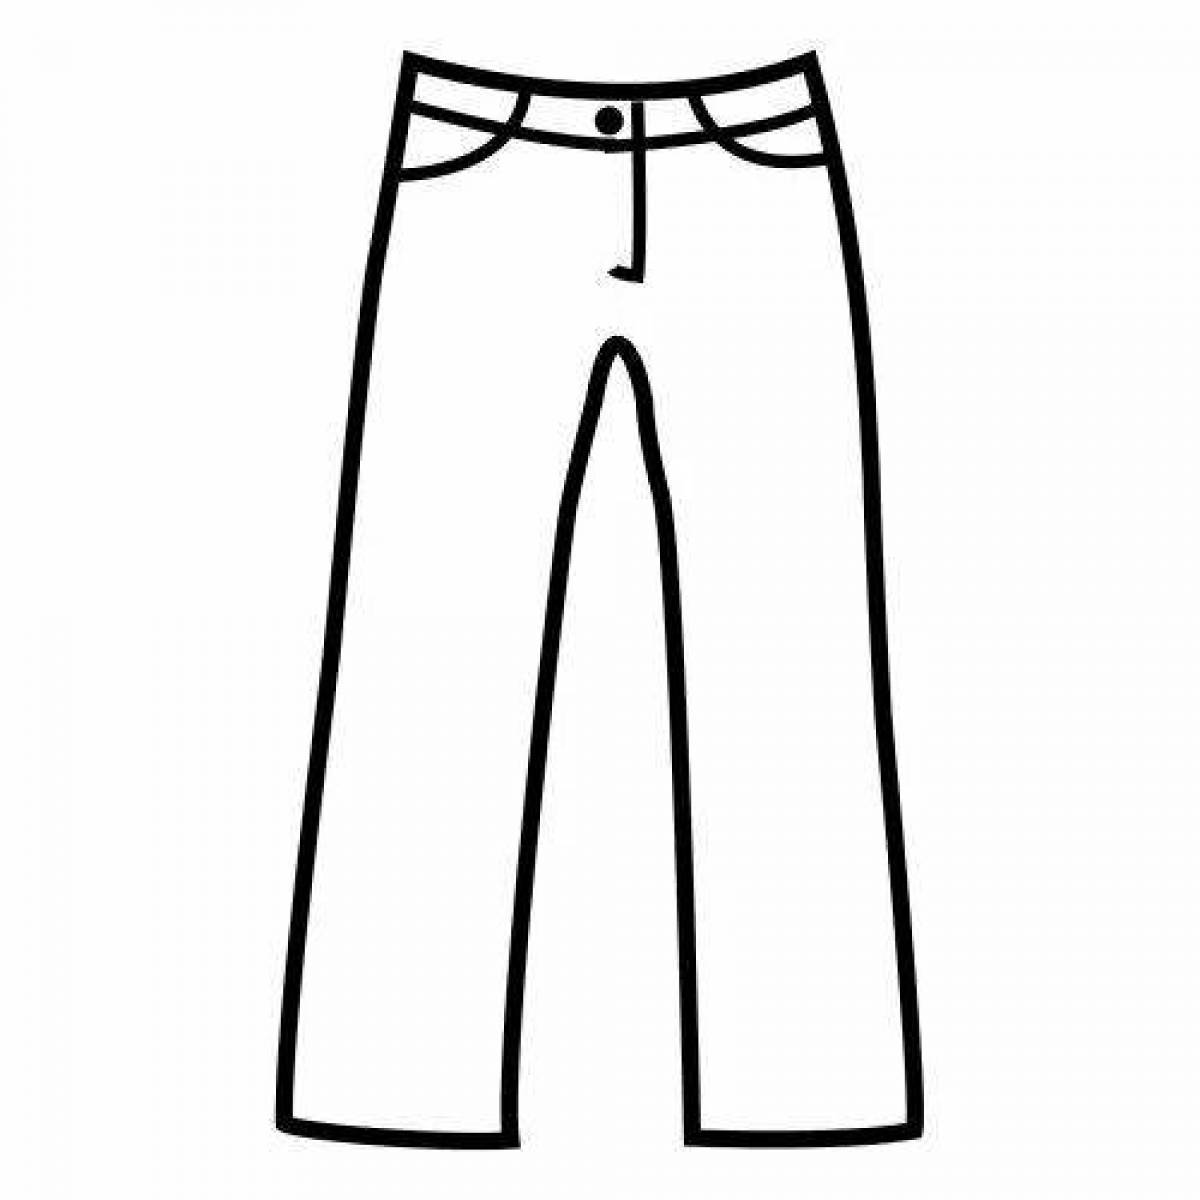 Adorable pants coloring book for kids